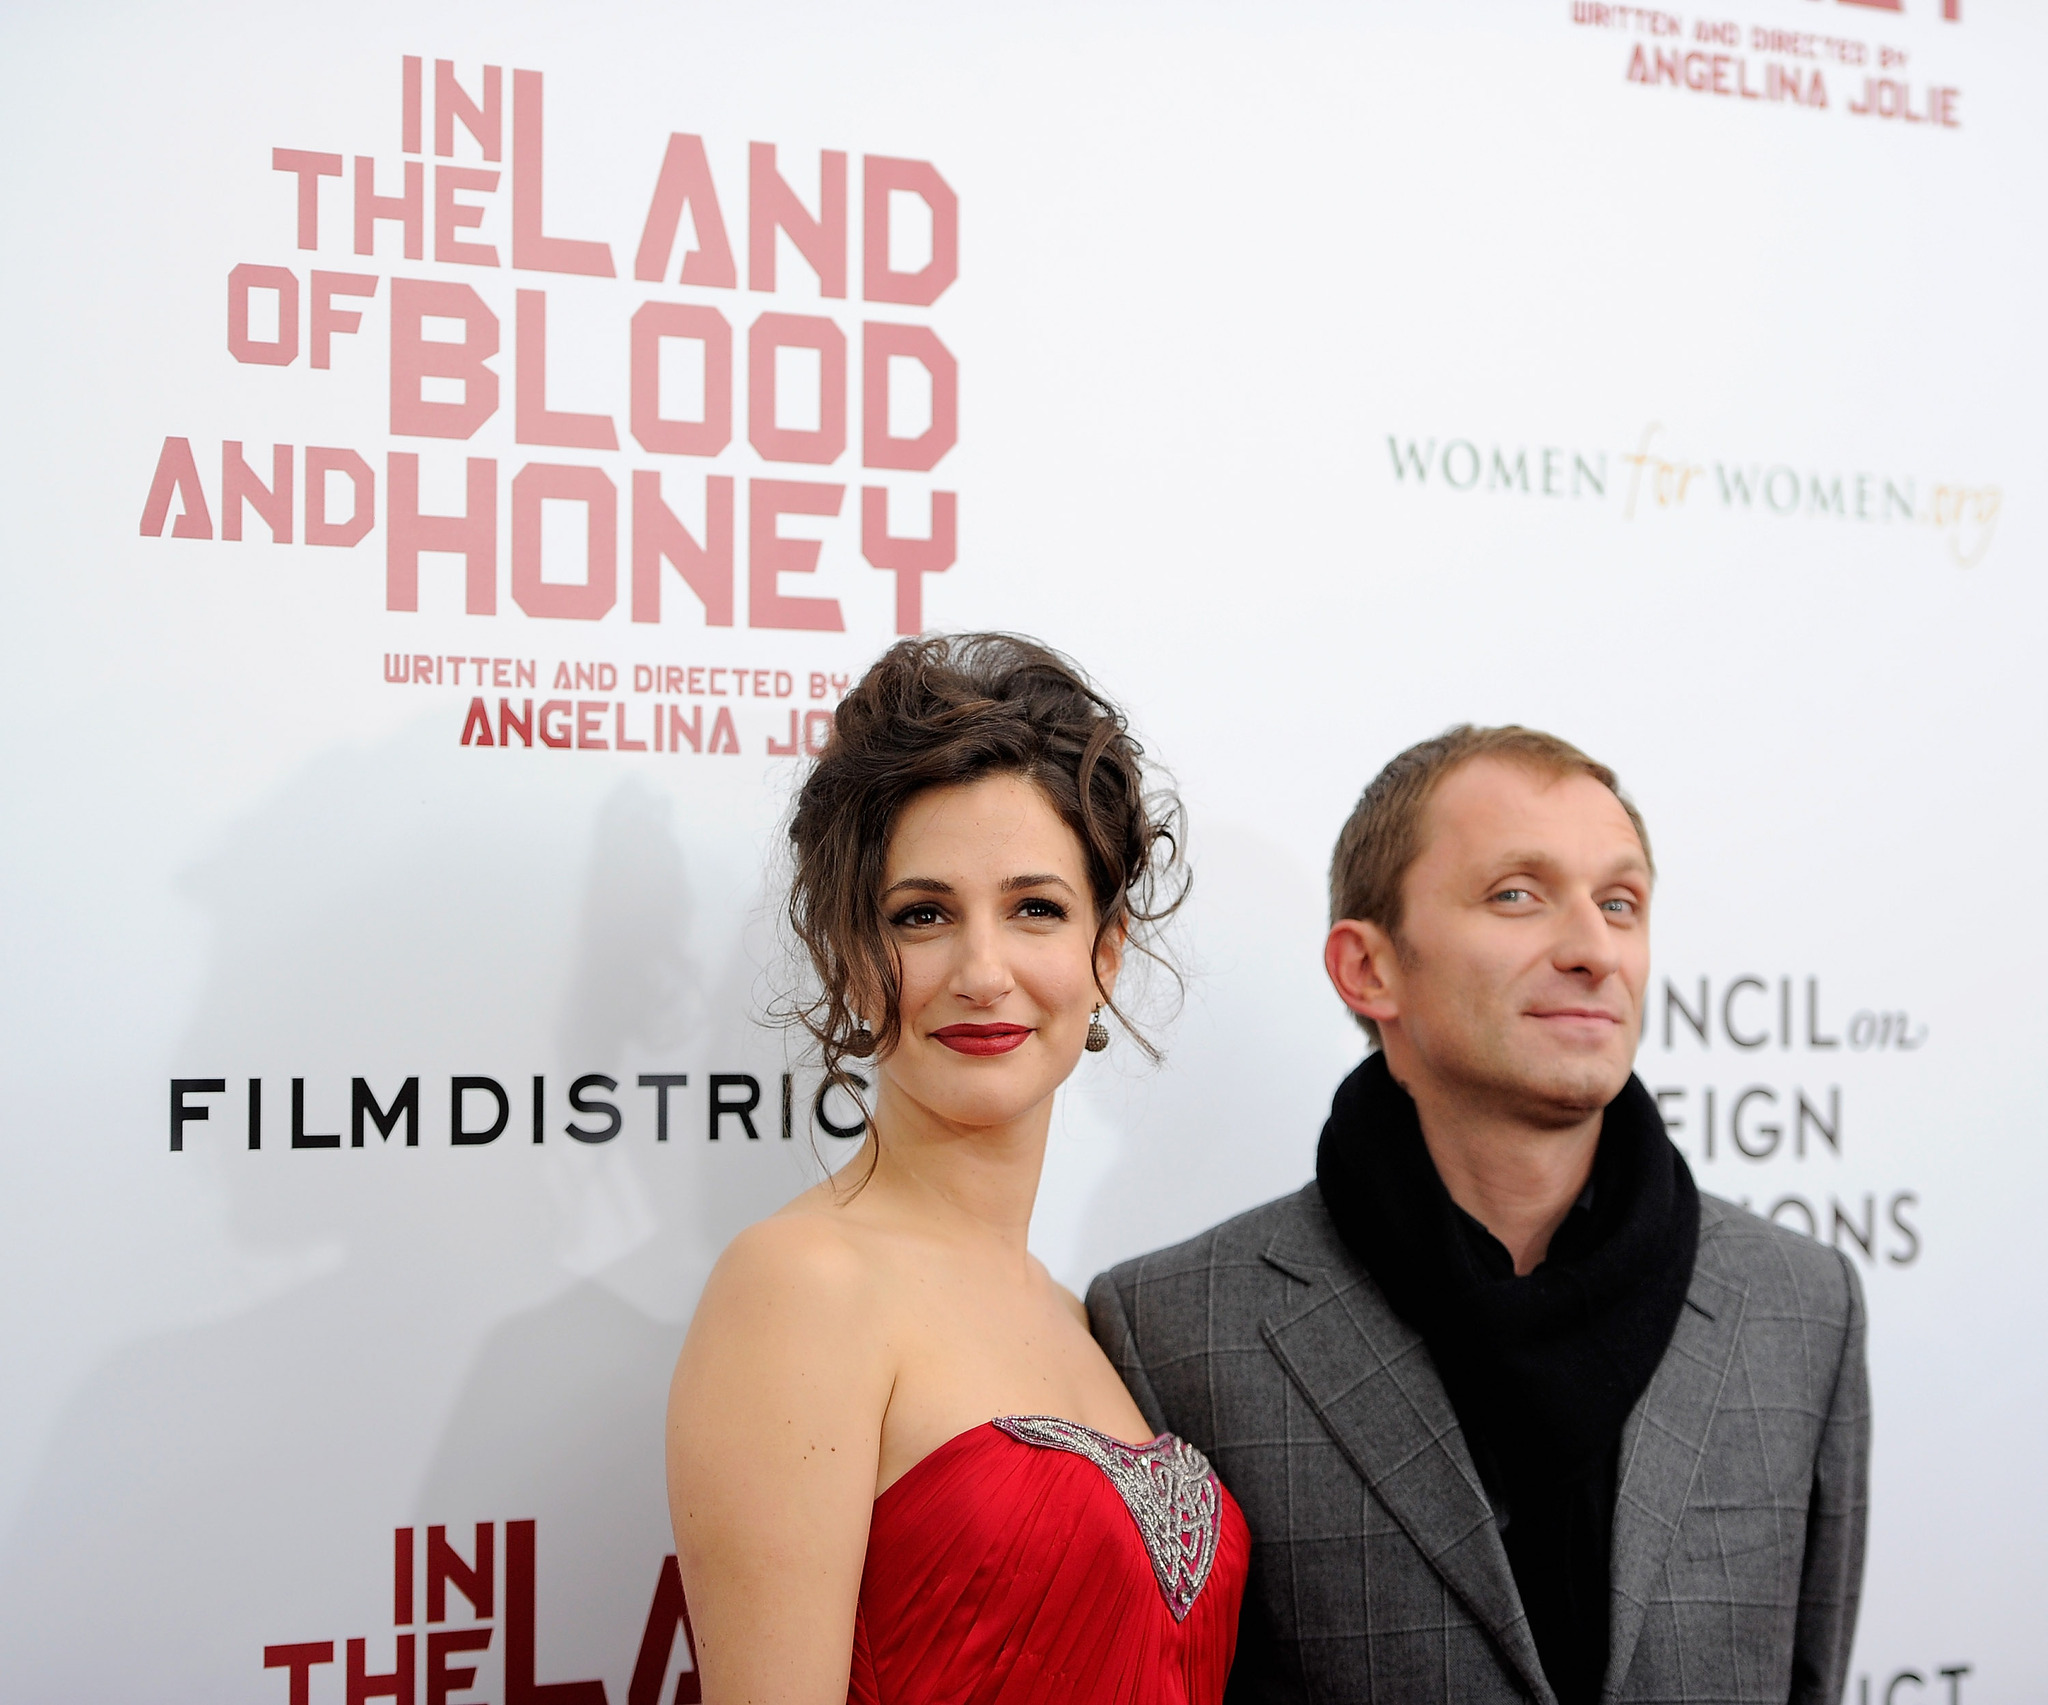 Zana Marjanovic and Goran Kostic at event of In the Land of Blood and Honey (2011)